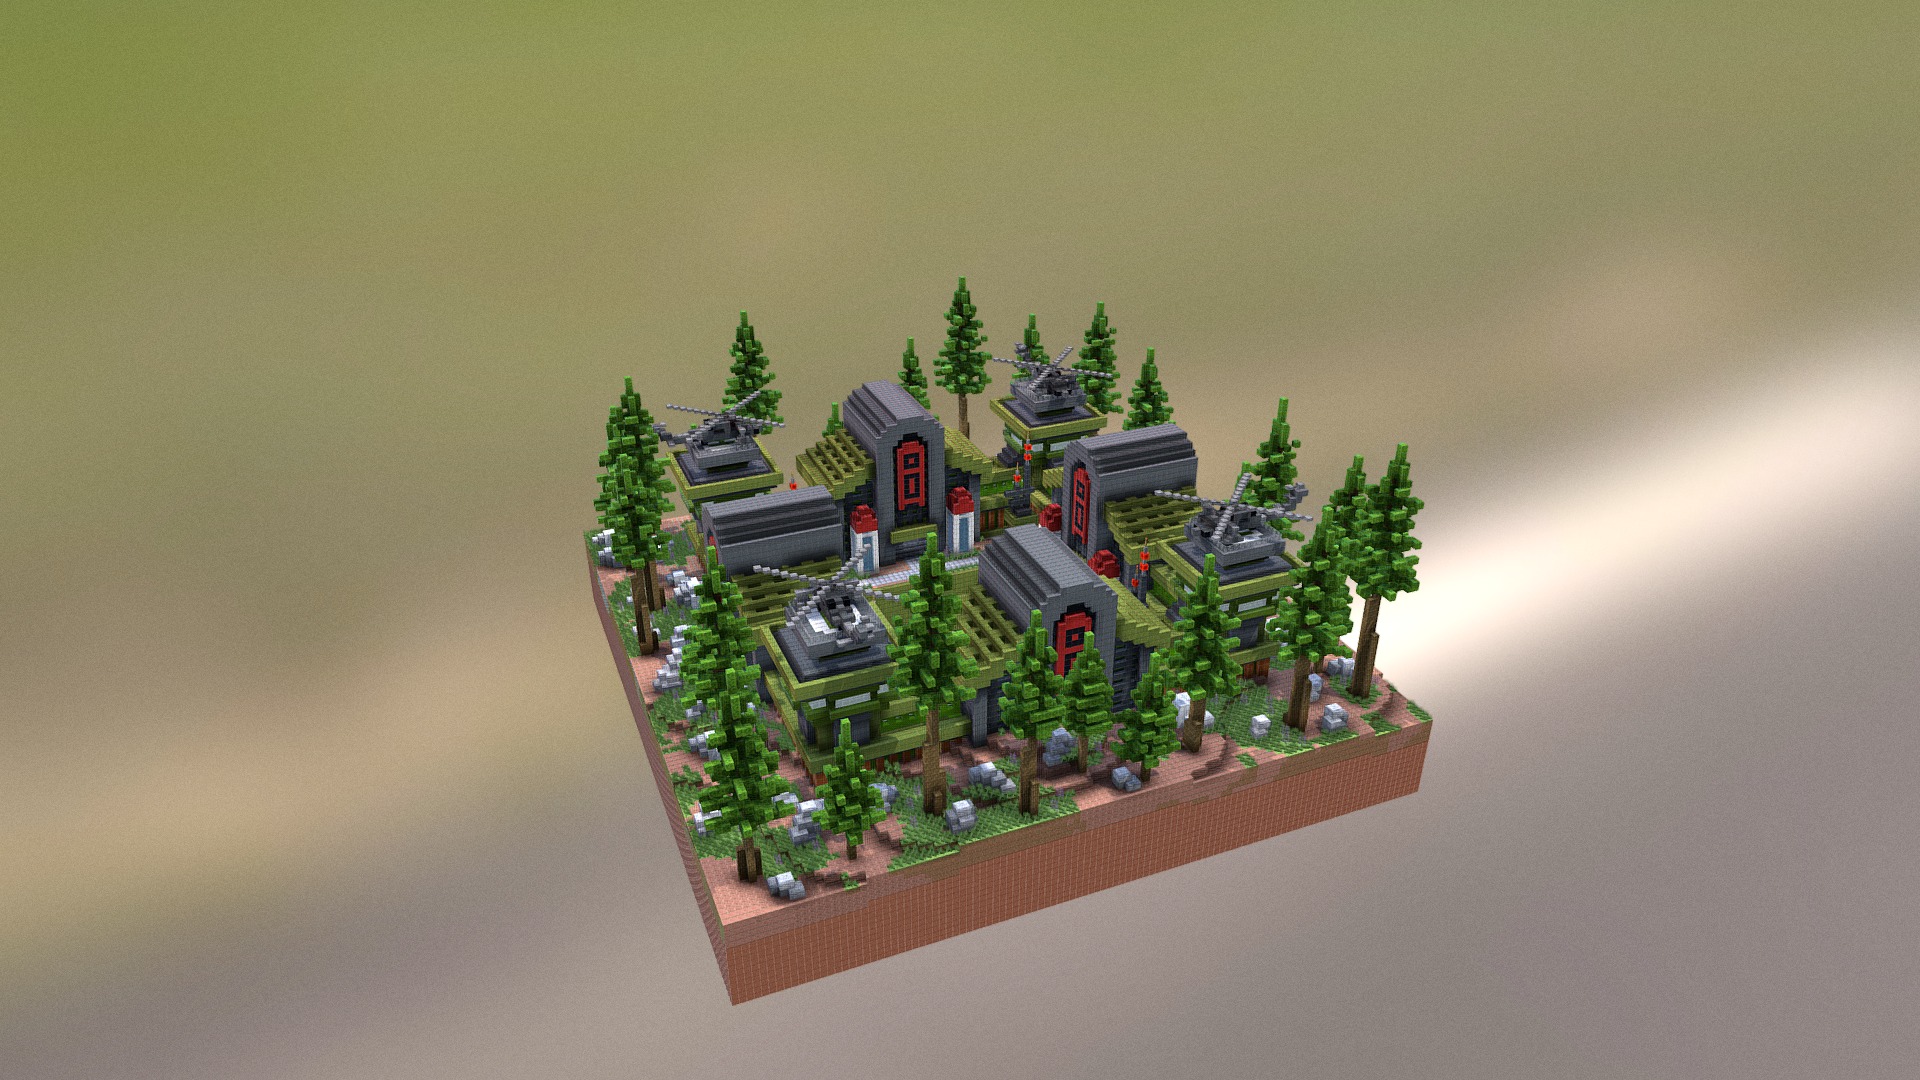 3D model Army PrisonMines - This is a 3D model of the Army PrisonMines. The 3D model is about a toy house on a green surface.